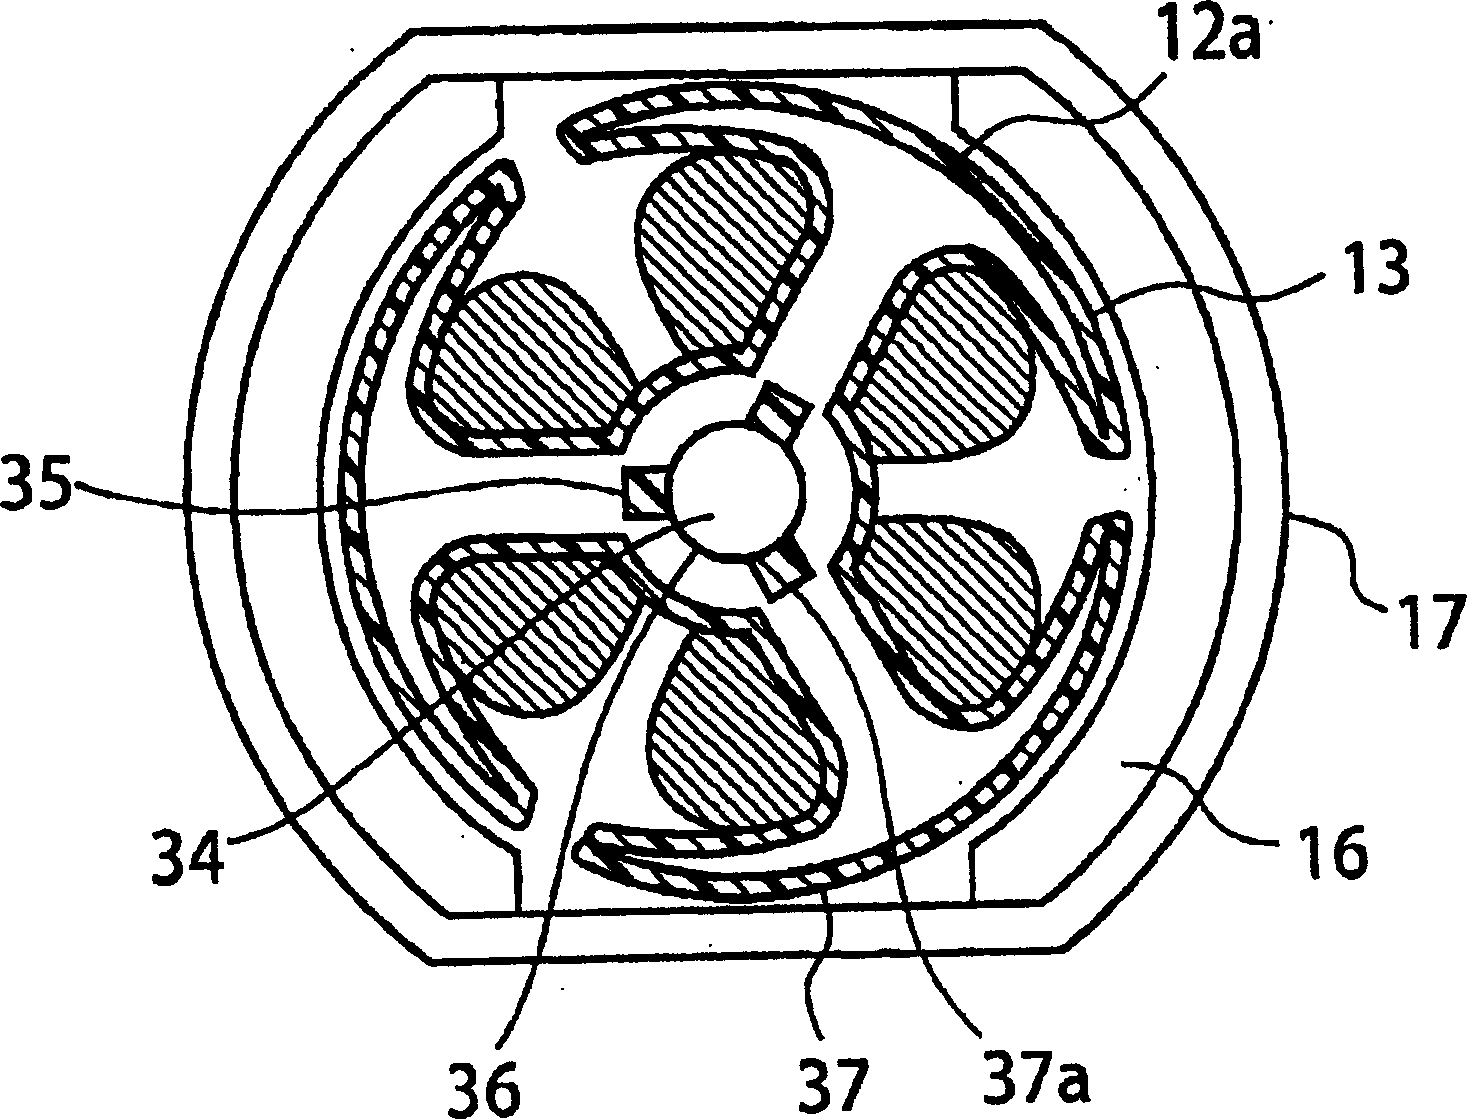 Rotor iron core of motor and small motor